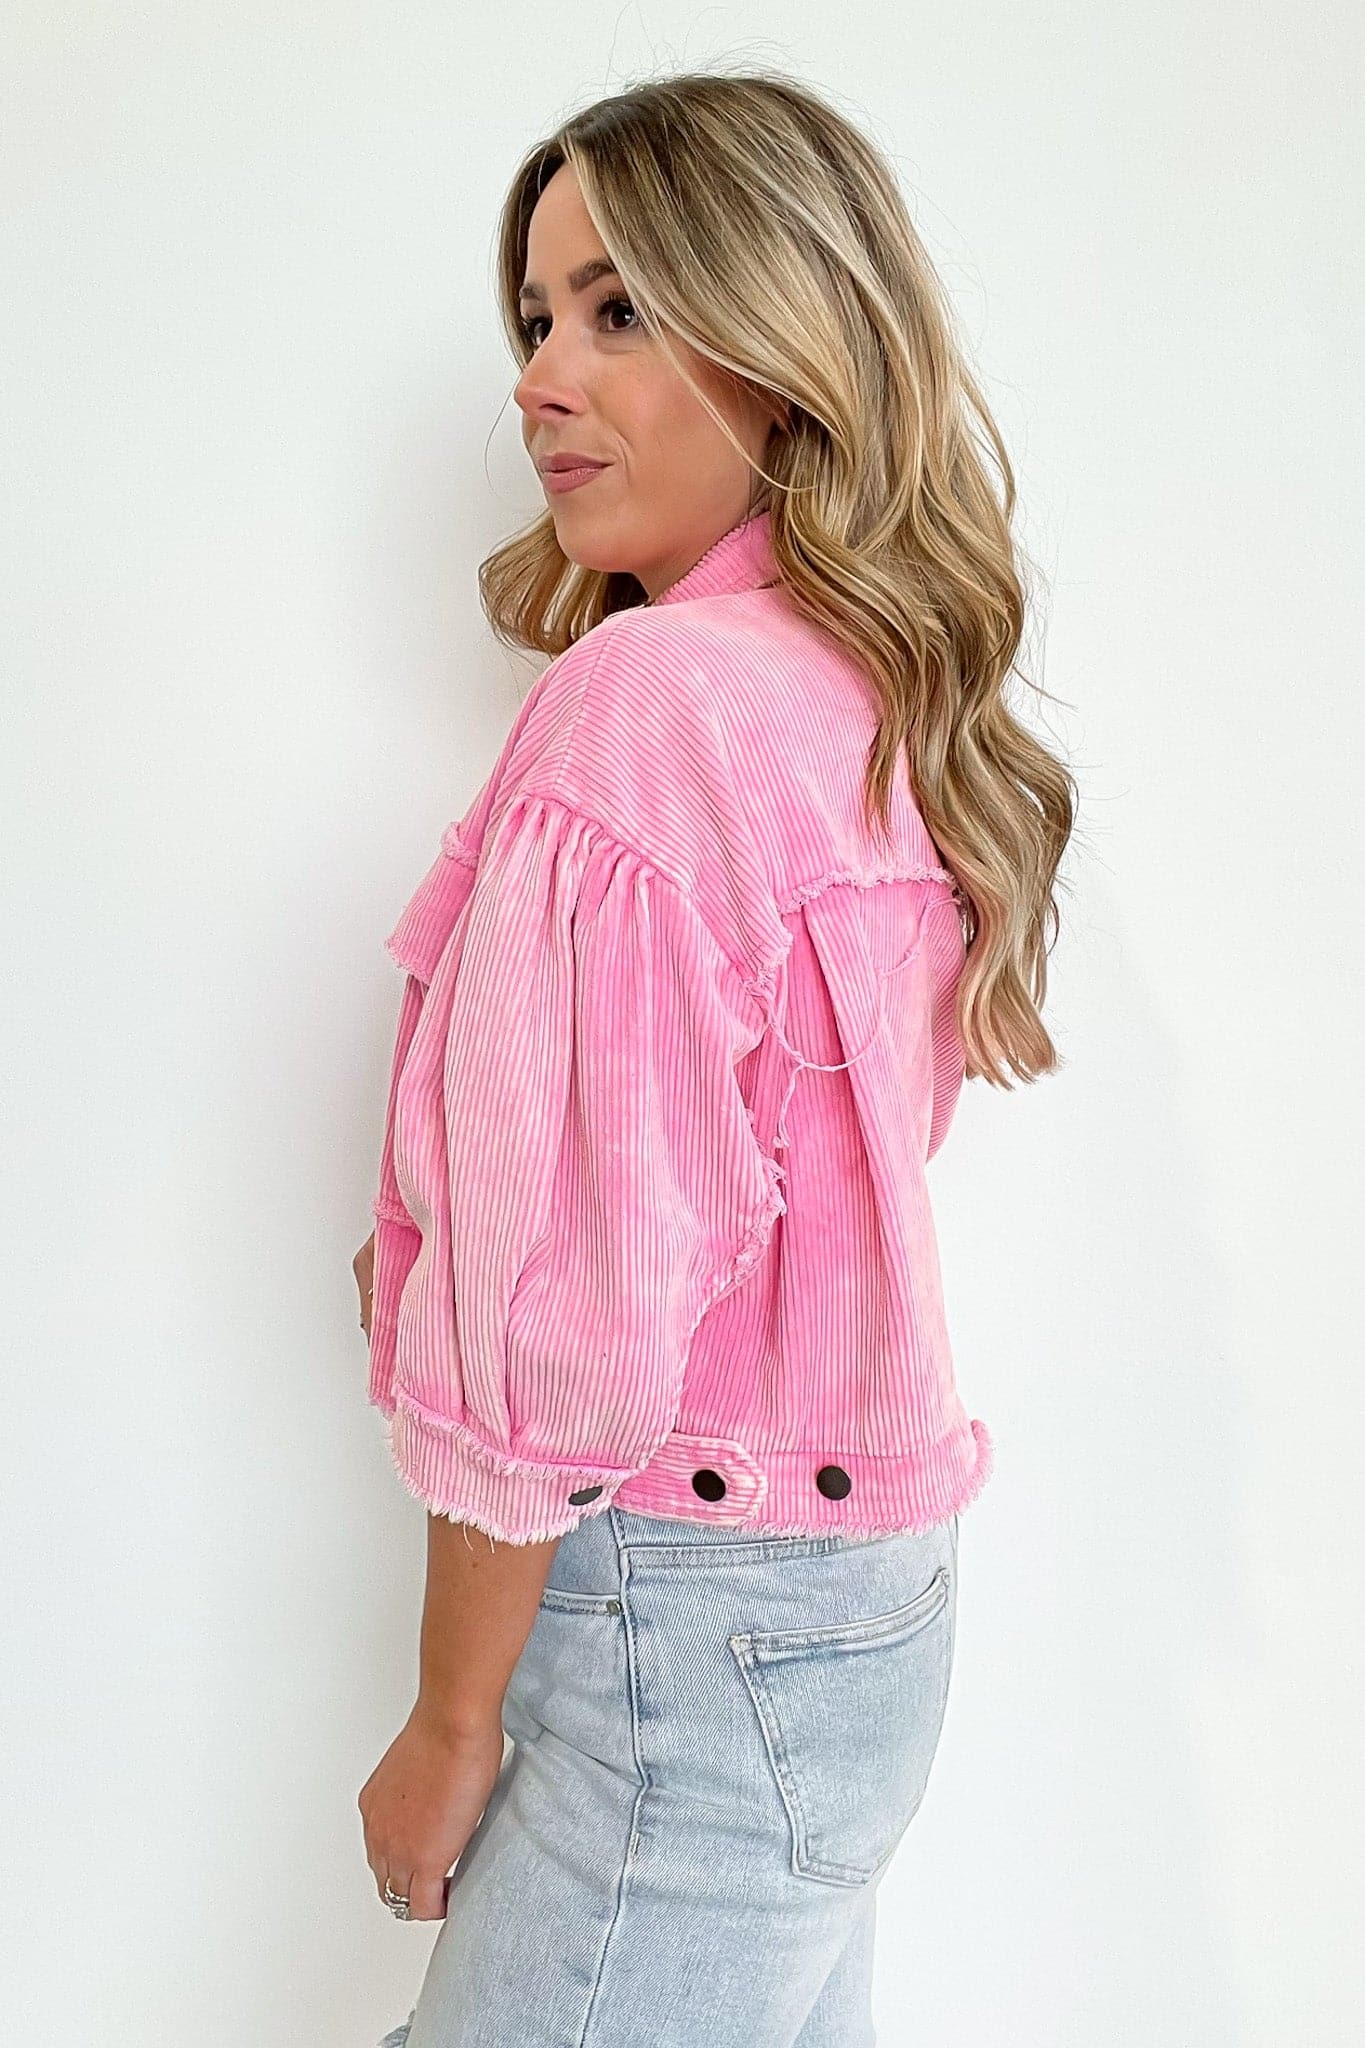  Simple Melody Cropped Frayed Jacket - FINAL SALE - Madison and Mallory